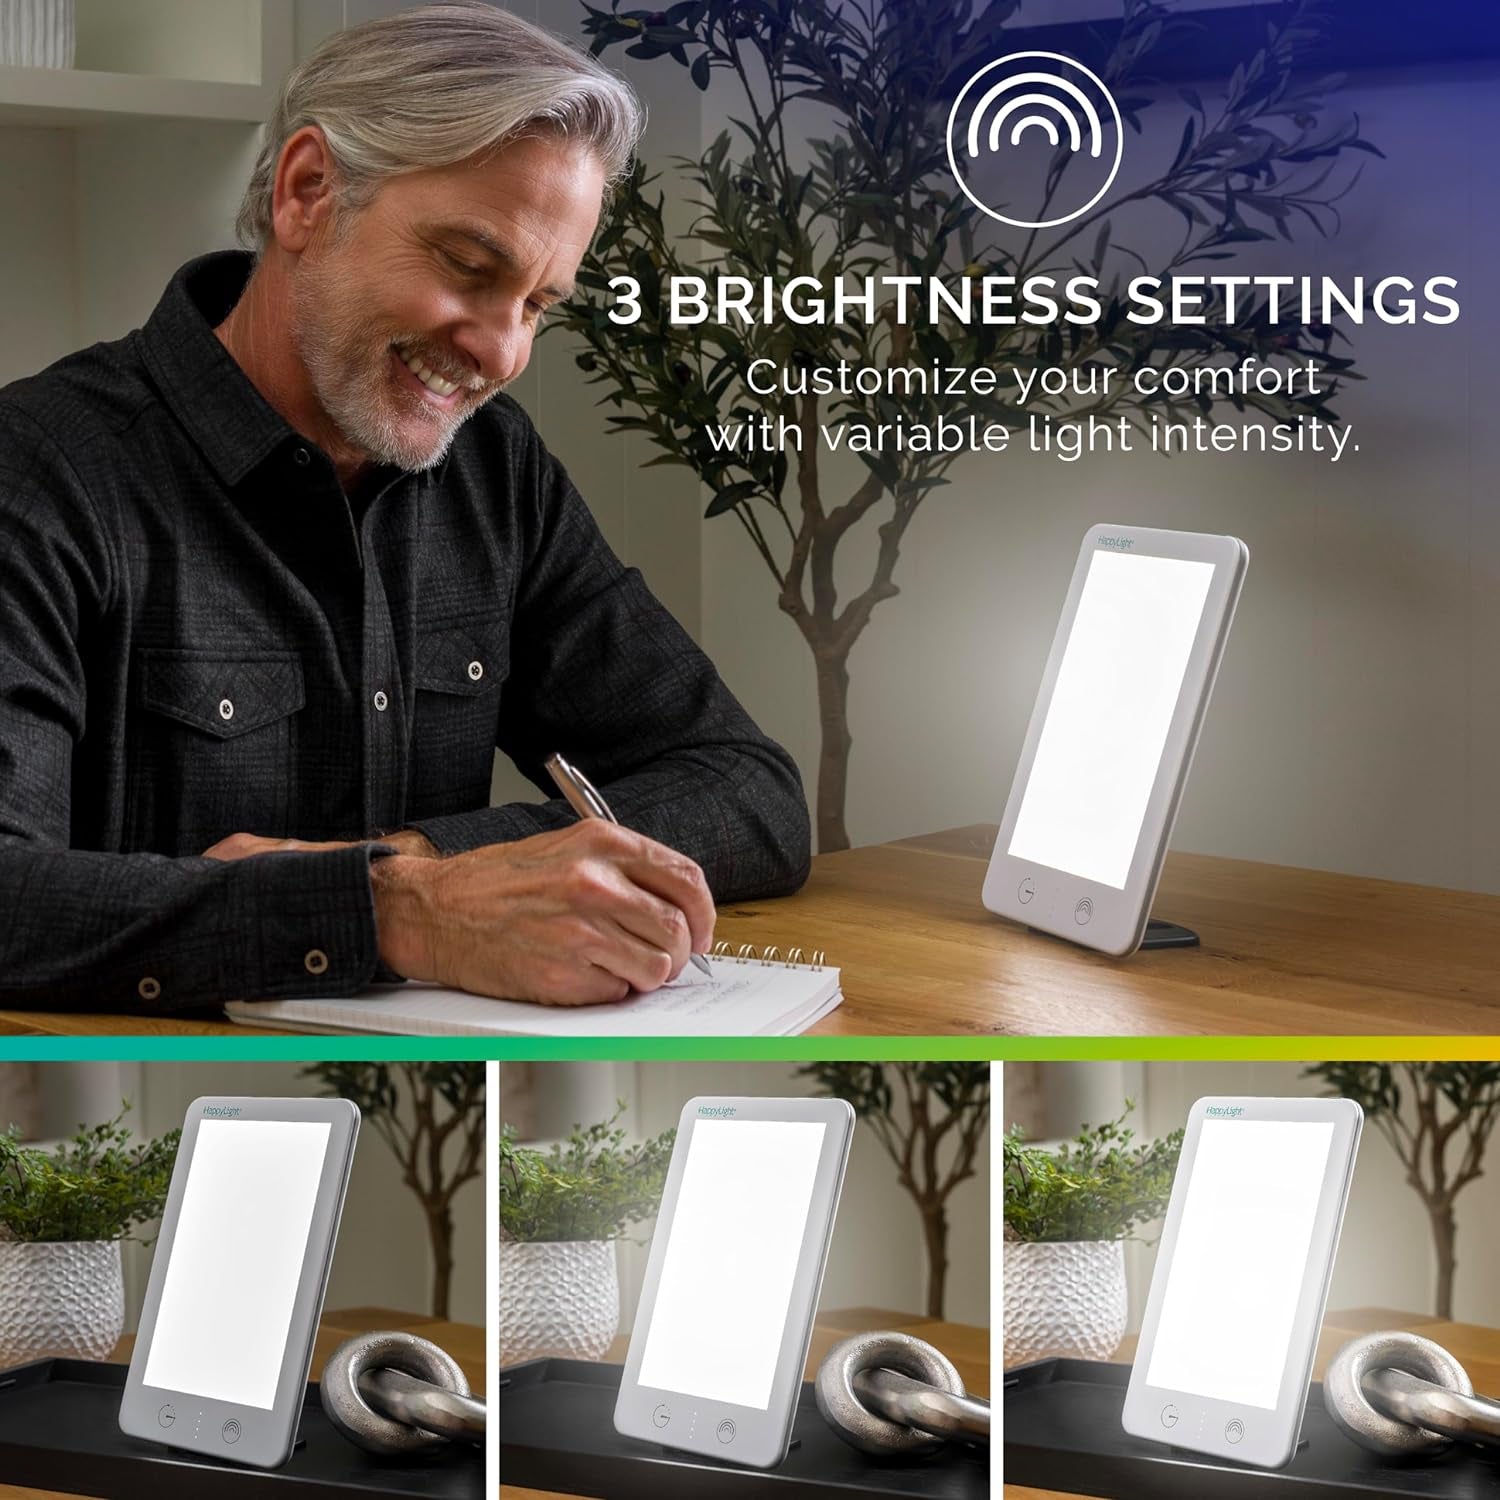 Happylight® Lumi plus - Light Therapy Lamp with 10,000 Lux, Uv-Free, LED Bright White Light with Adjustable Brightness, Countdown Timer, & Detachable Stand - Boost Mood, Sleep, and Focus